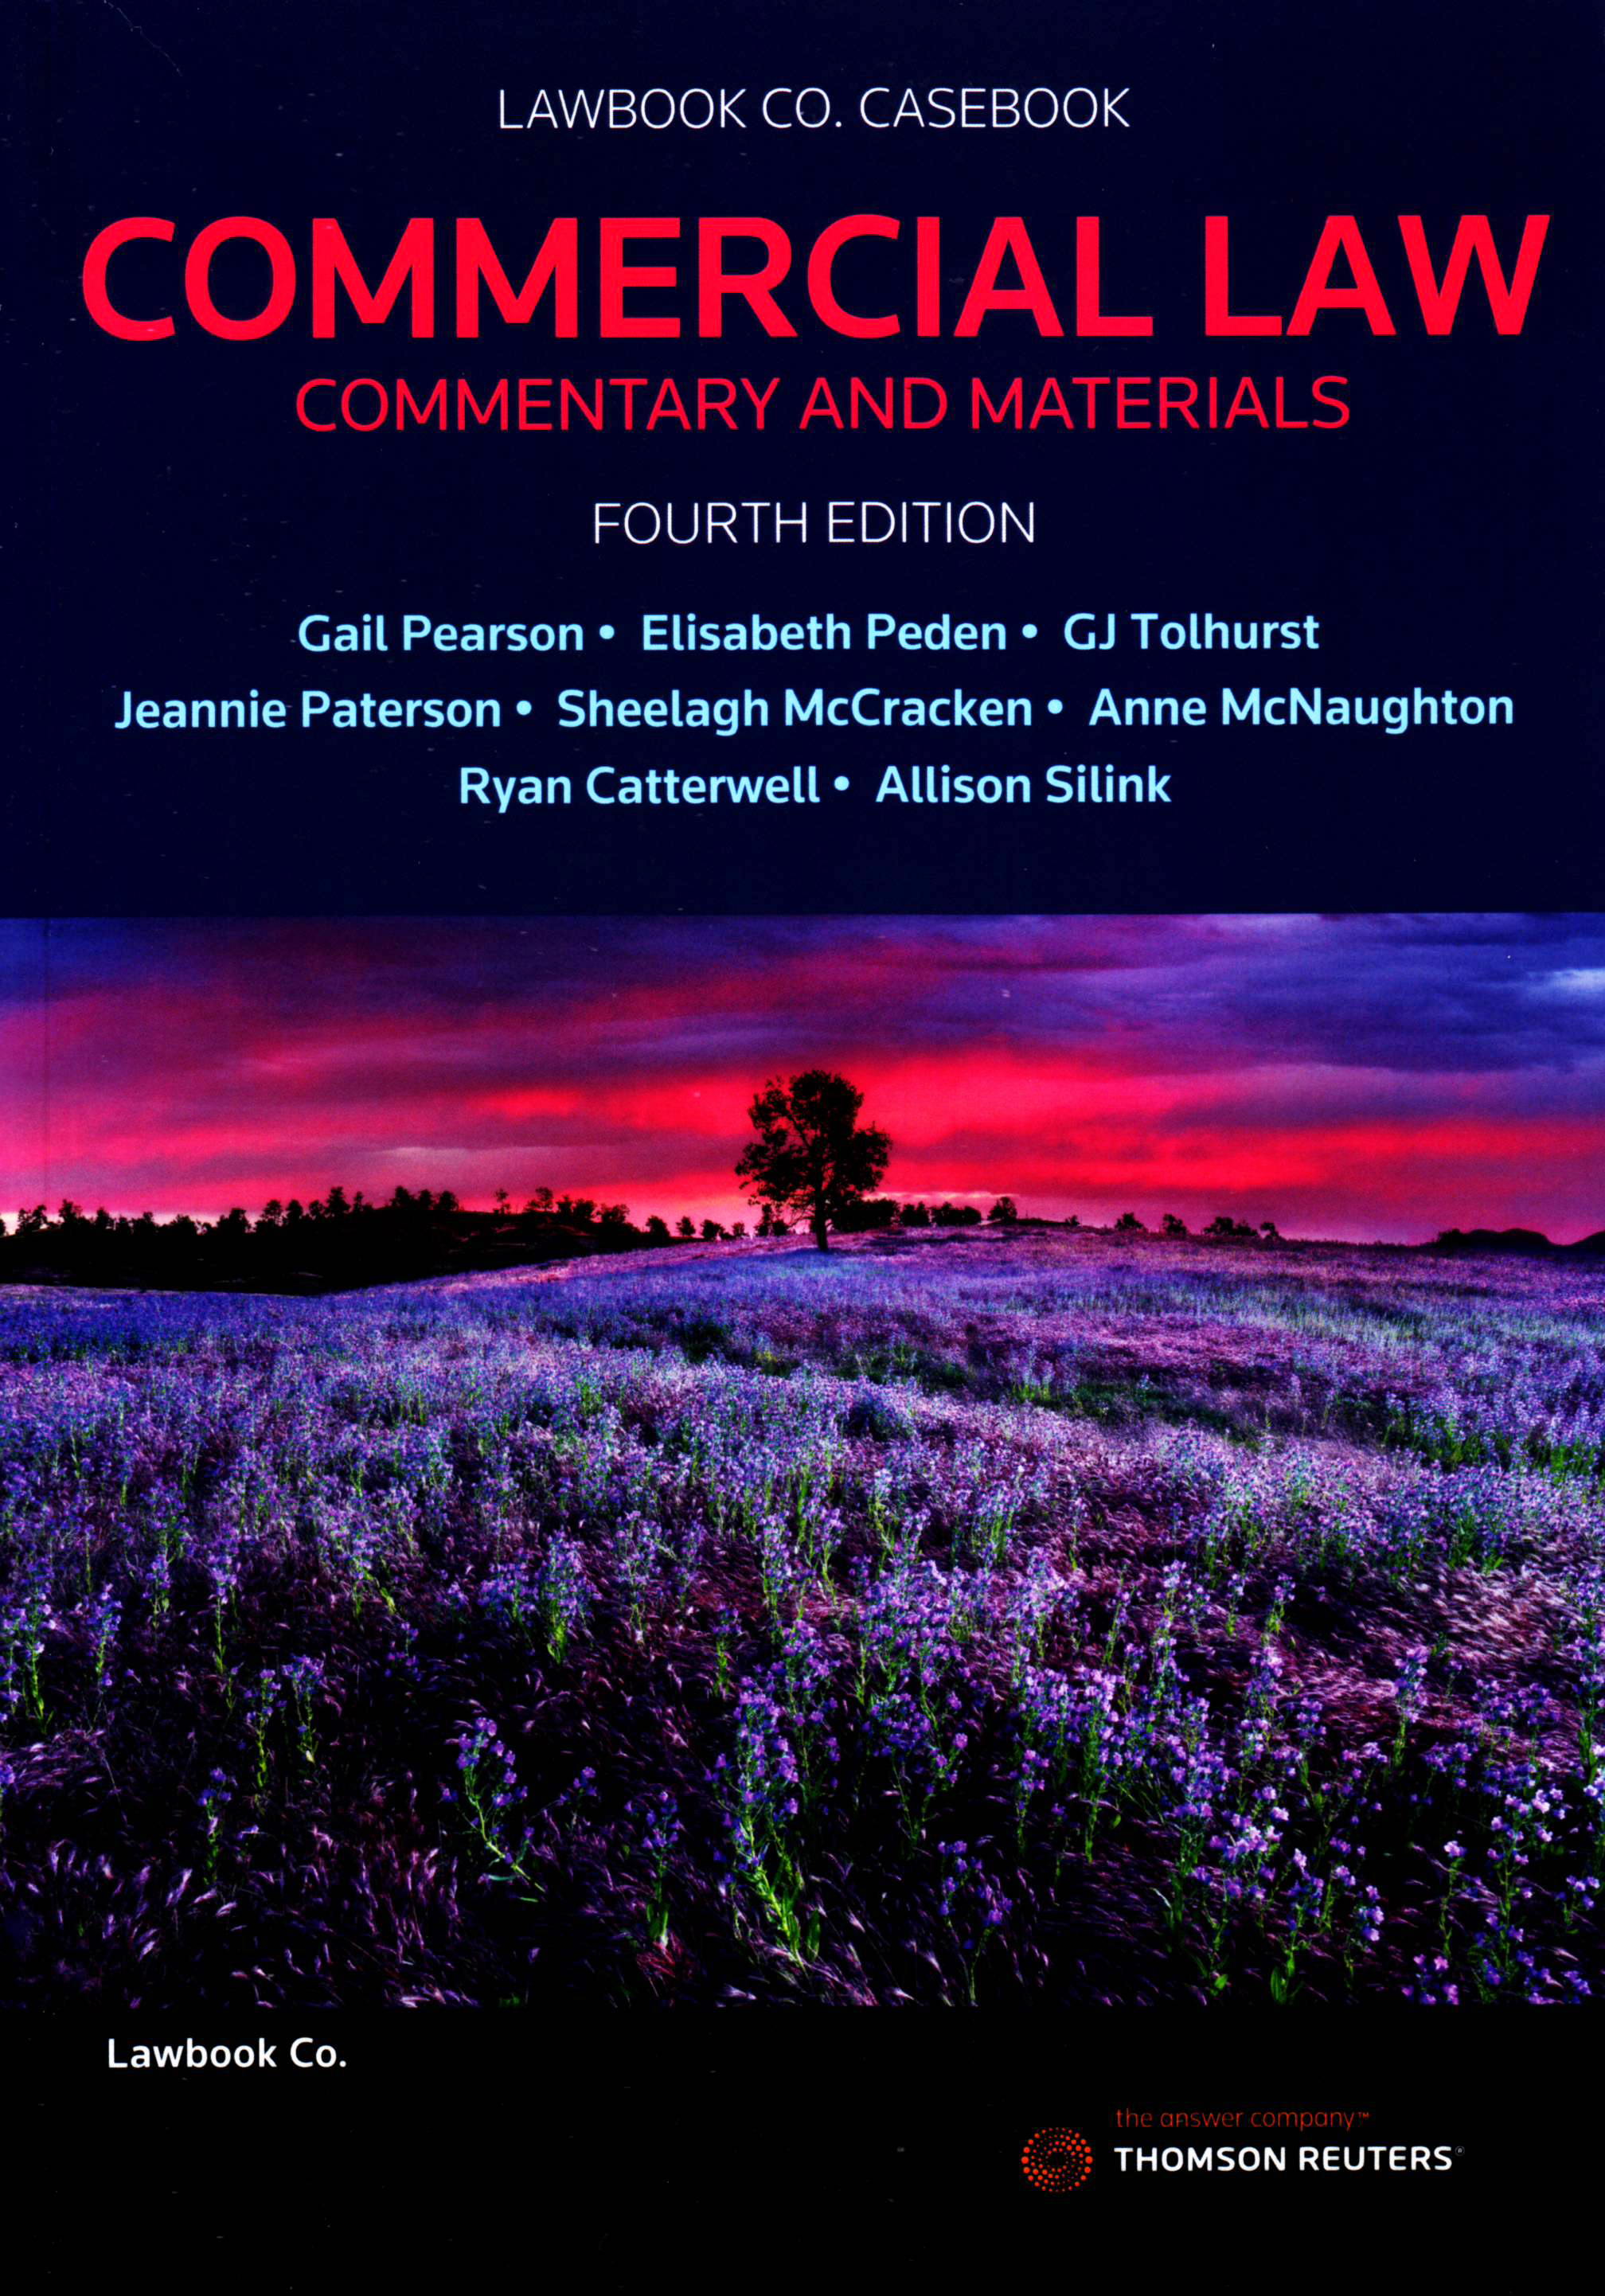 Commercial Law: Commentary and Materials e4